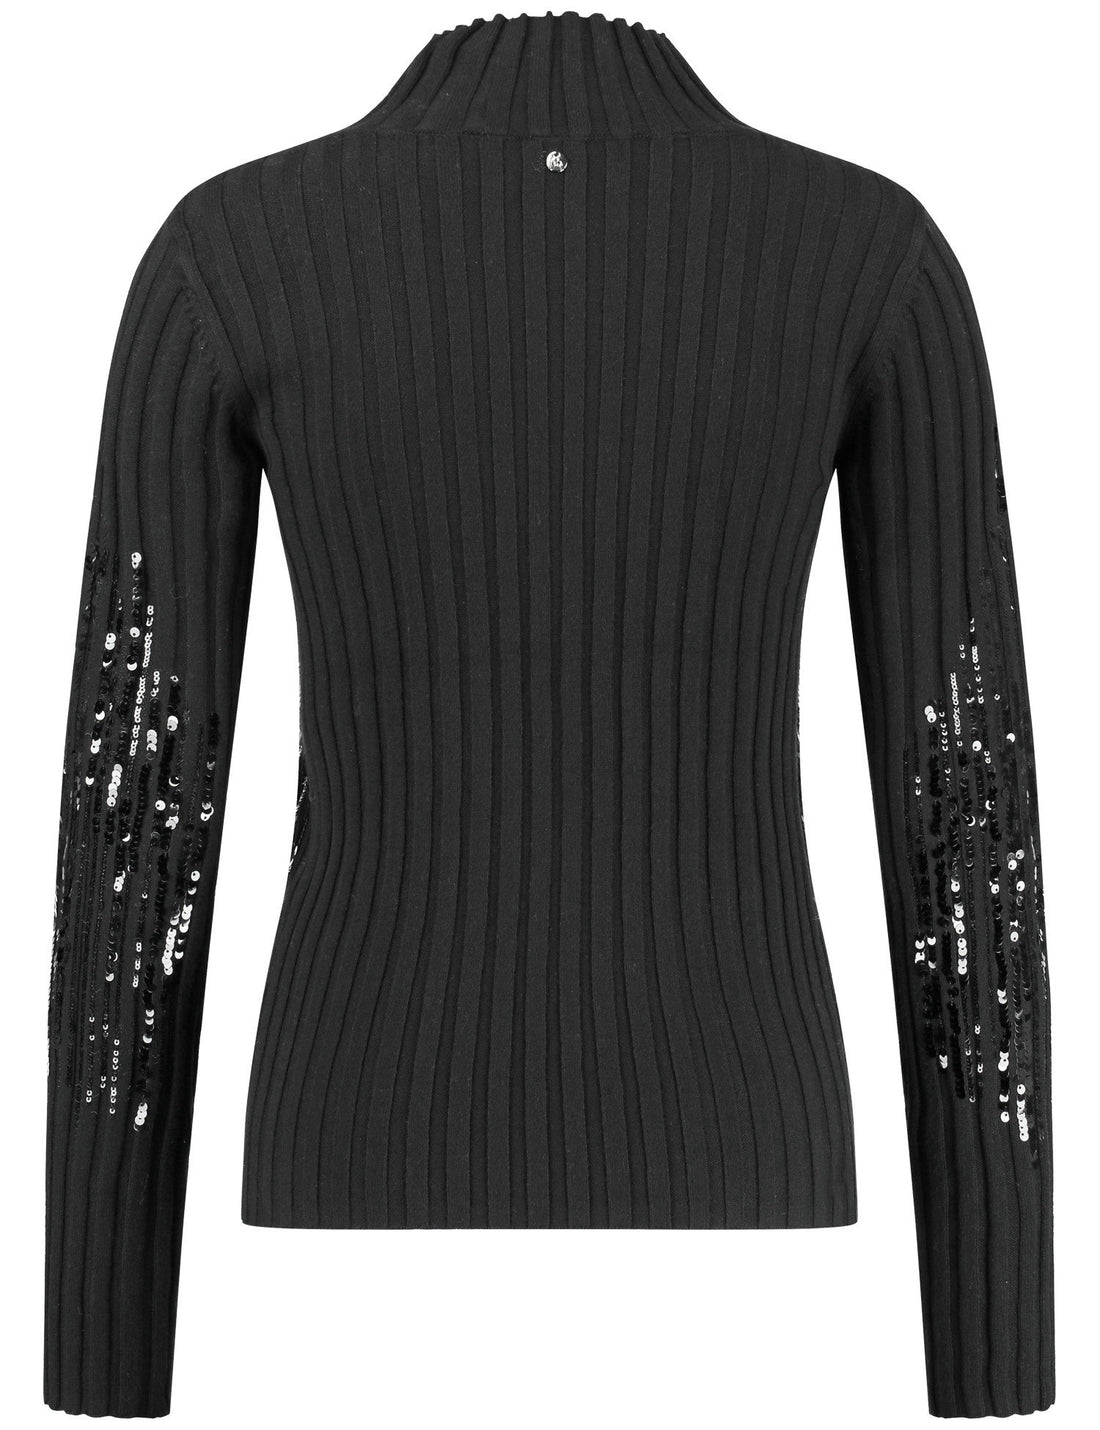 Sweater With A Percentage Of Silk And Sequin Trim_170566-44740_11000_02